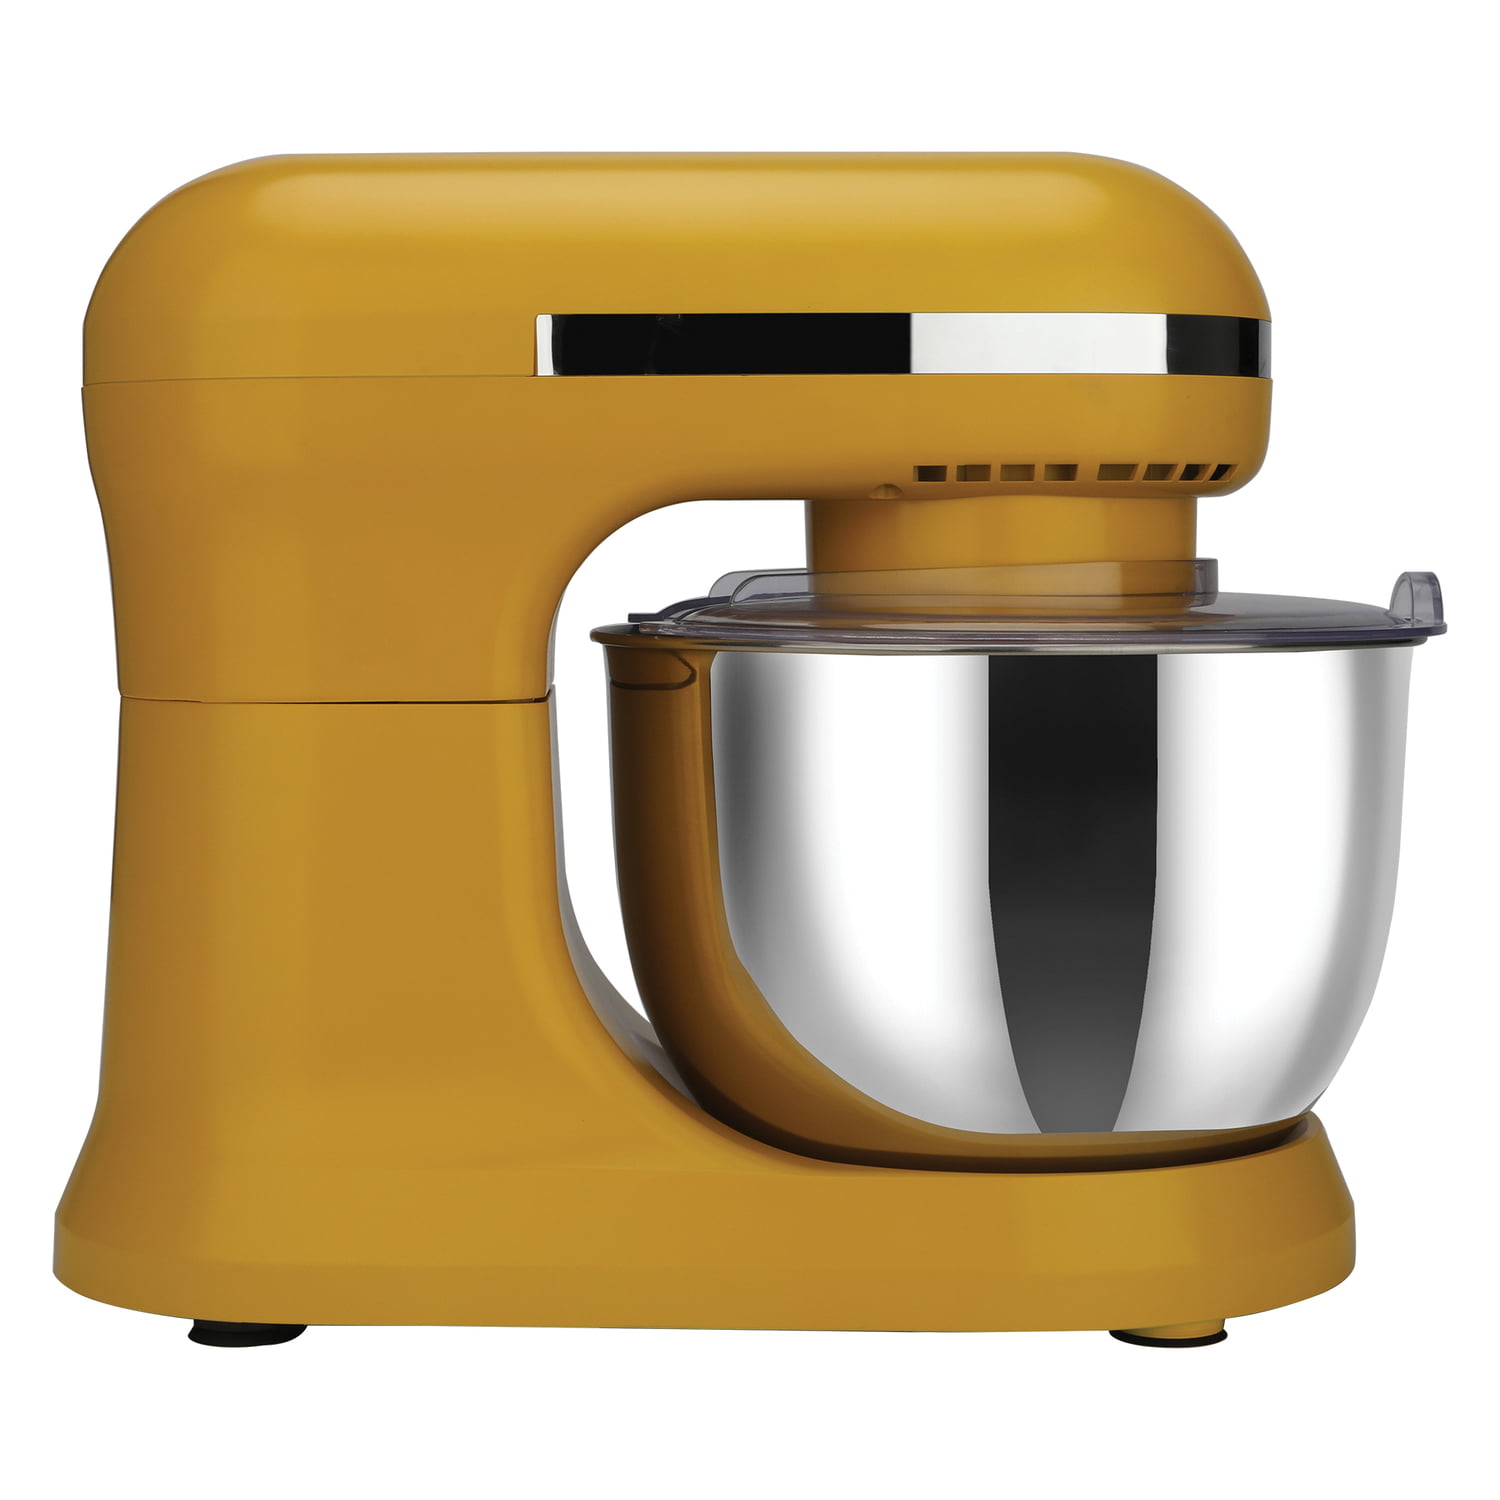 Equipment review: High shear mixers – Chefman 300W Soft-Touch